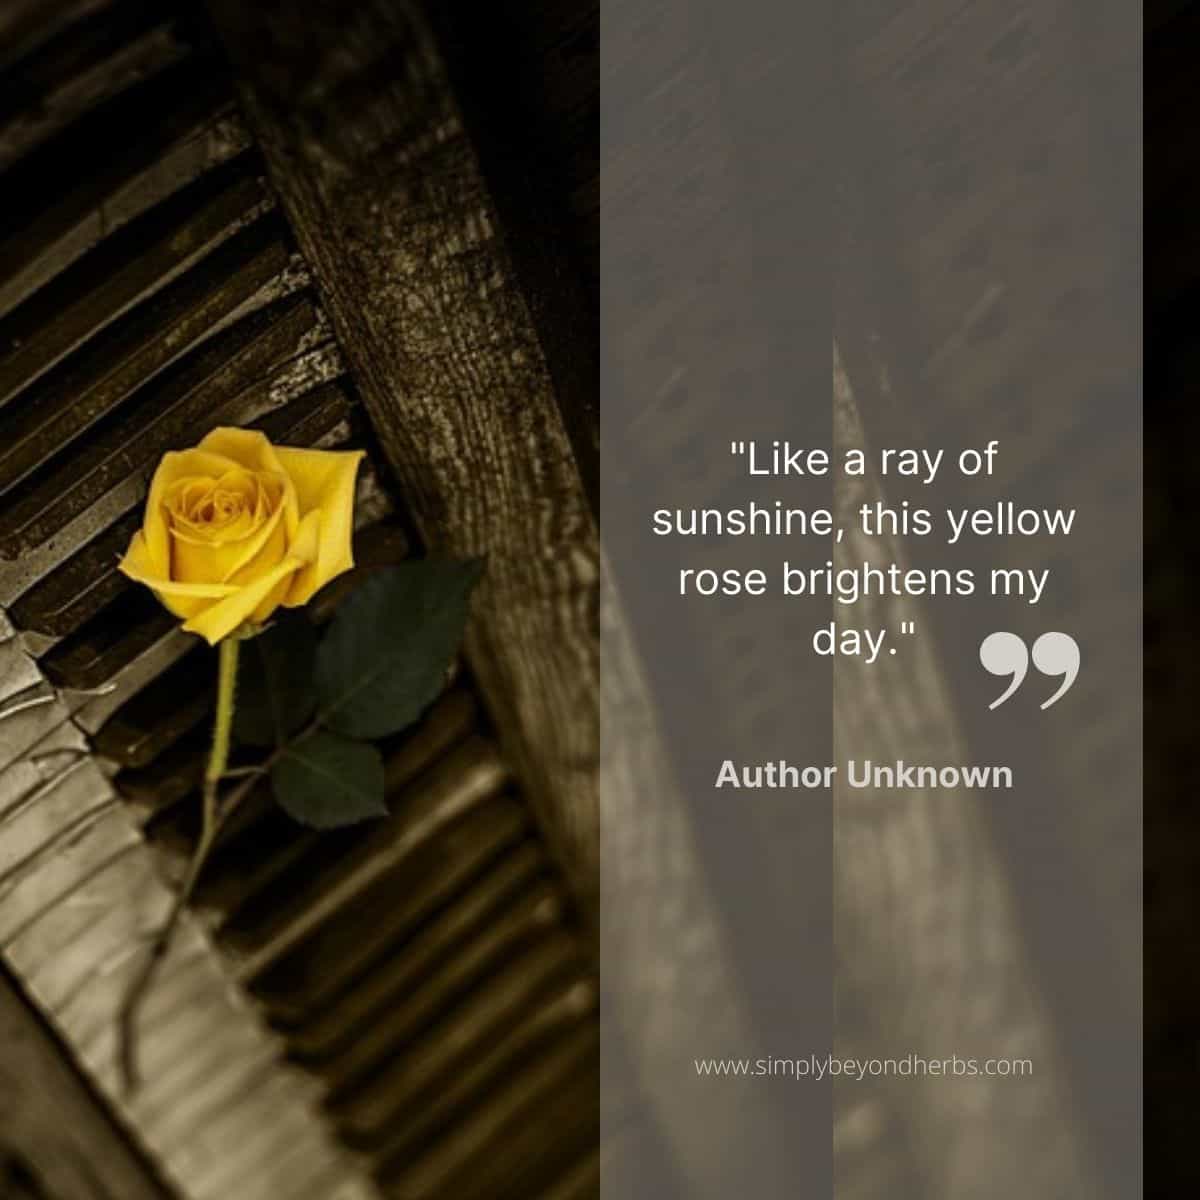 Quotes About Roses In Life Like A Ray Of Sunshine, This Yellow